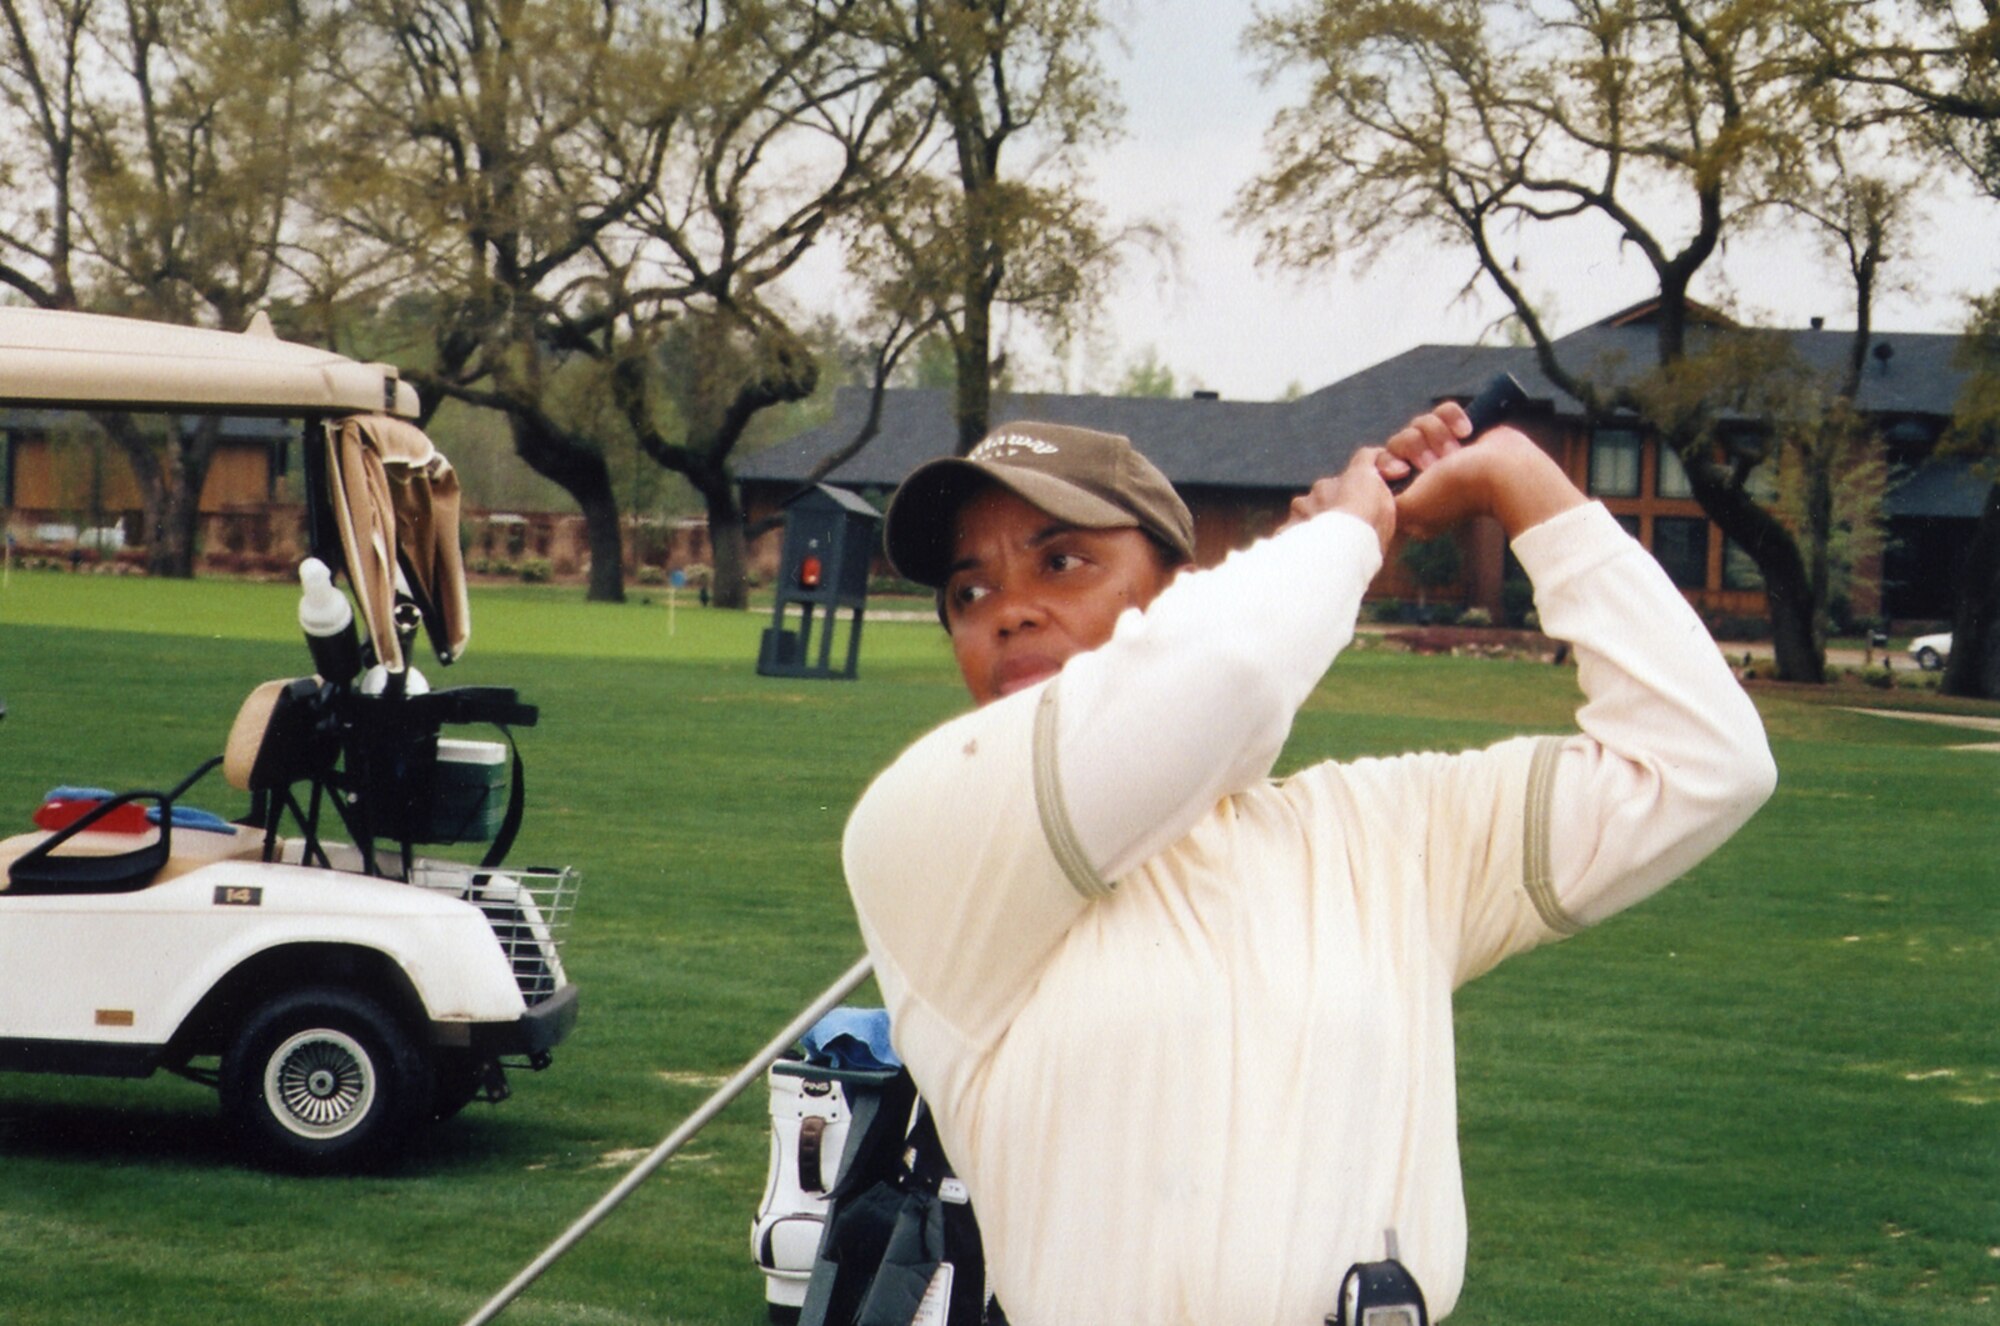 Addie Cobb, Quiet Pines operations clerk and golf instructor here, watches the ball after hitting a drive. Mrs. Cobb was recently selected for the position of contributing editor of the African American Golfer’s Digest, a quarterly publication. (Courtesy photo)